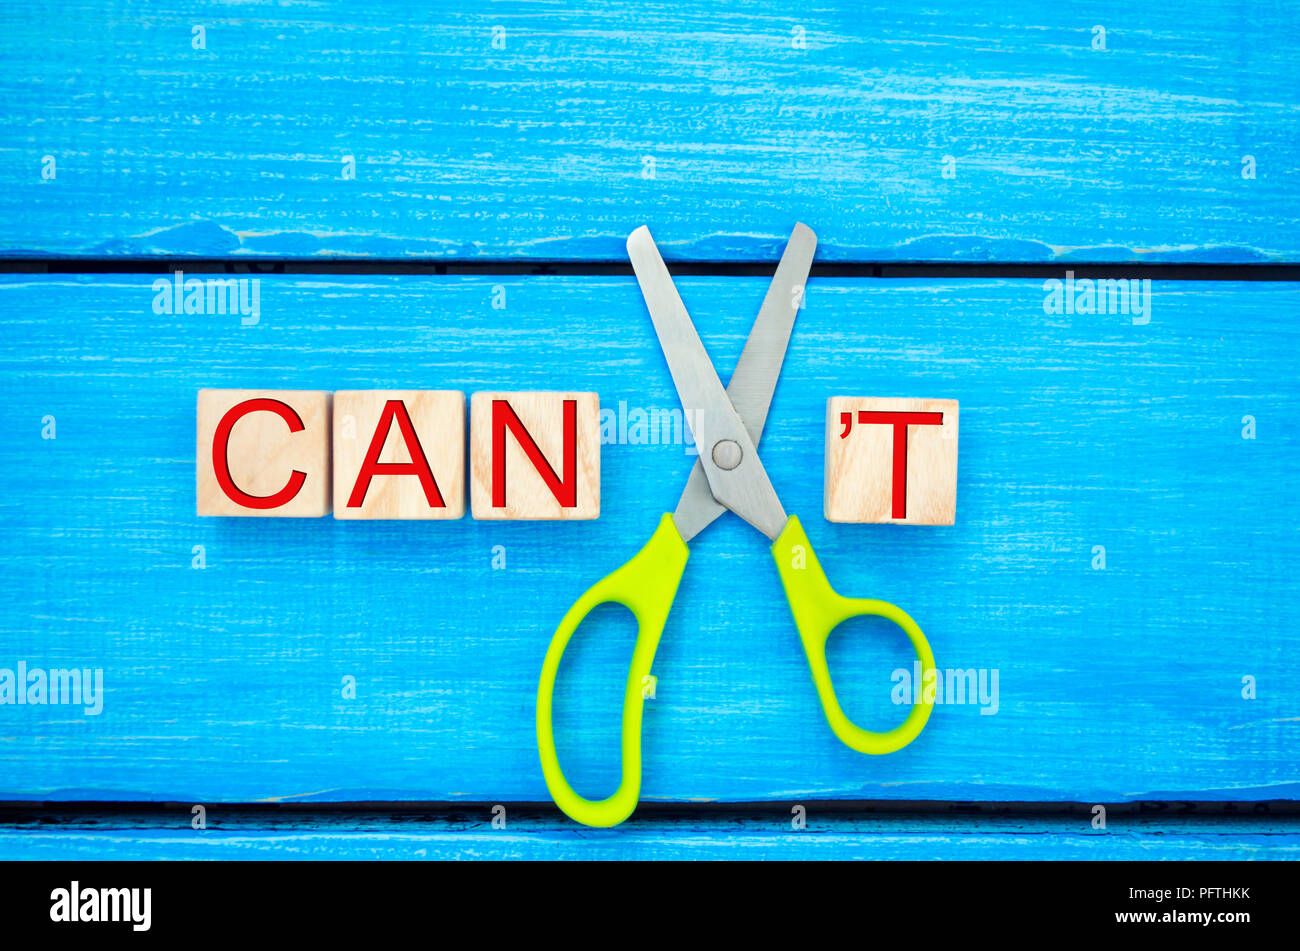 I can self motivation - cutting the letter t of the written word I can't so it says I can, goal achievement, potential, overcoming Stock Photo